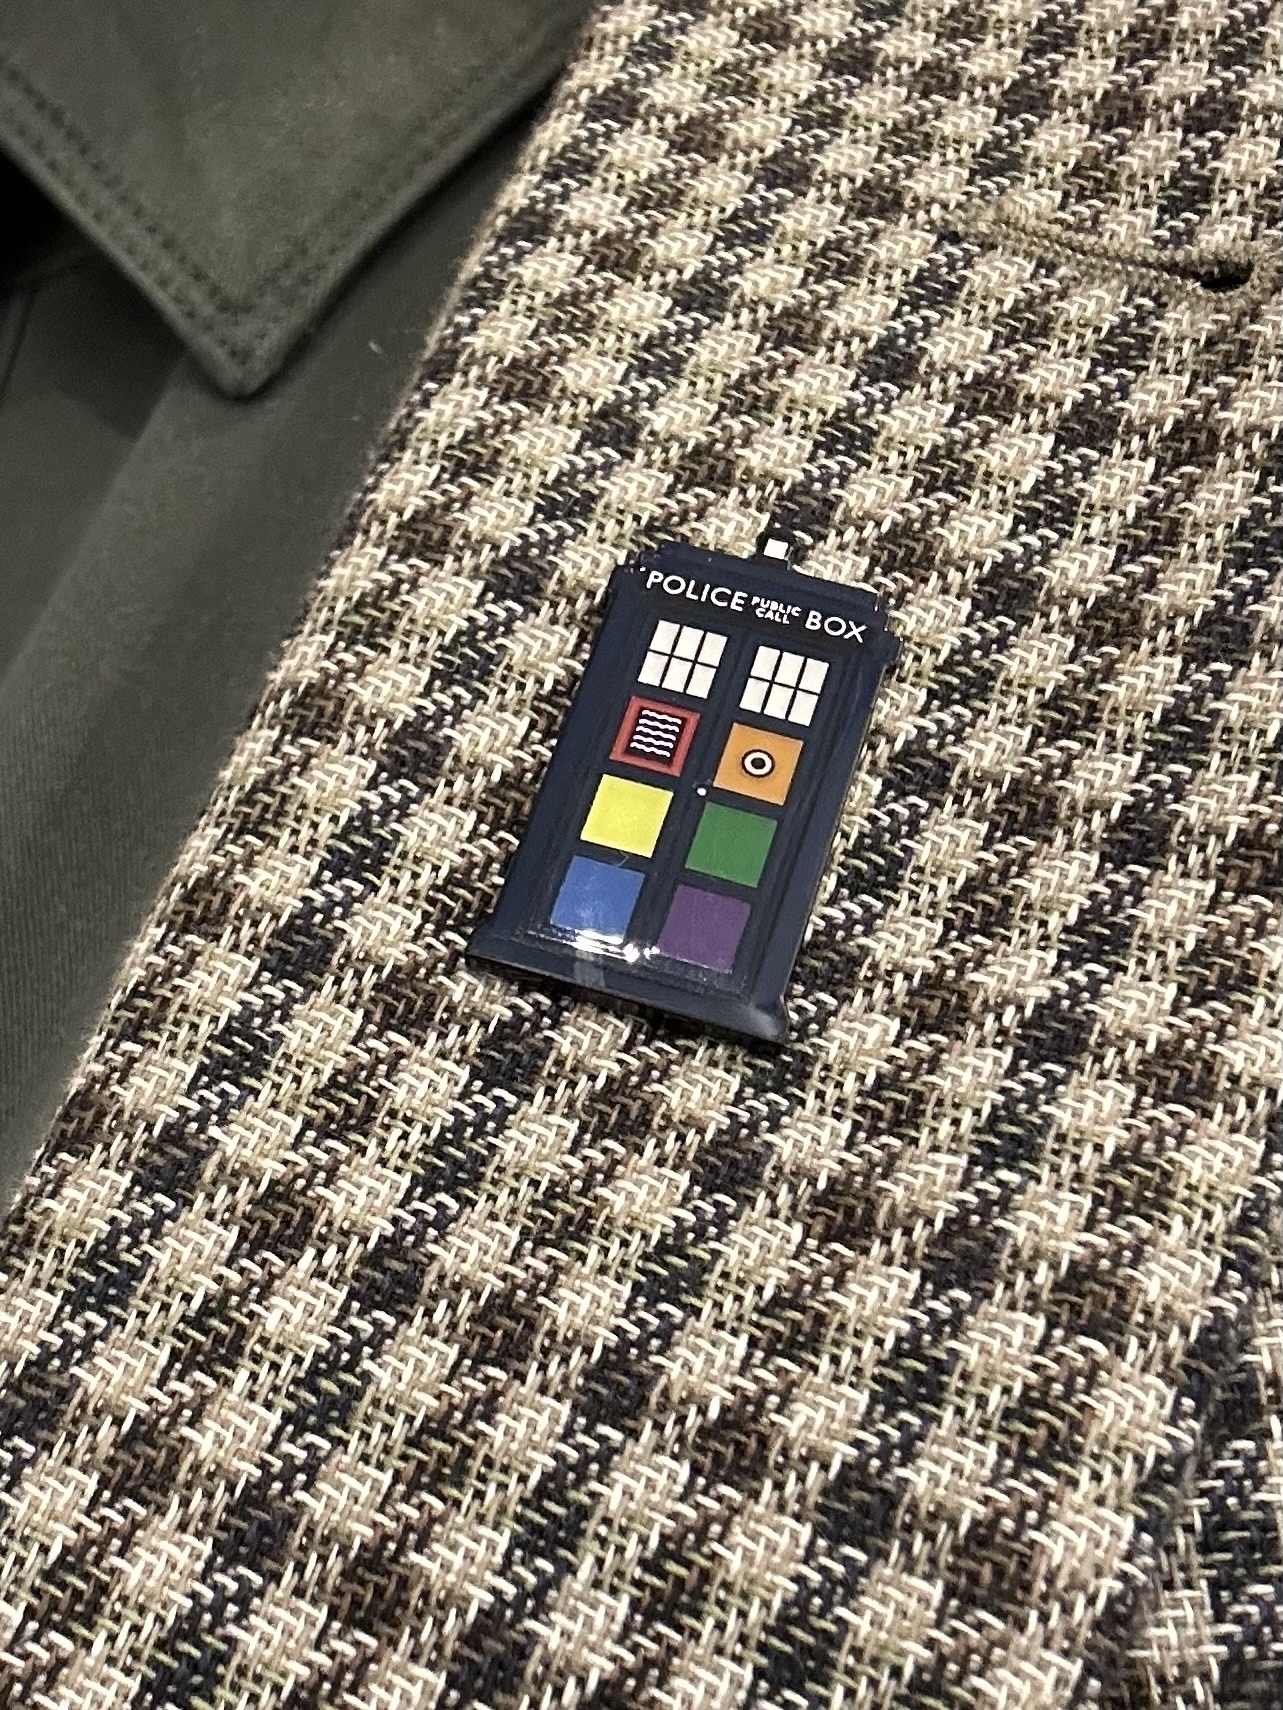 A lapel badge in the shape of the TARDIS police box from the tv show Doctor Who. The badge is blue with rainbow colours in the panels of the Police Box doors. It’s pinned to a green and cream houndstooth pattern blazer.